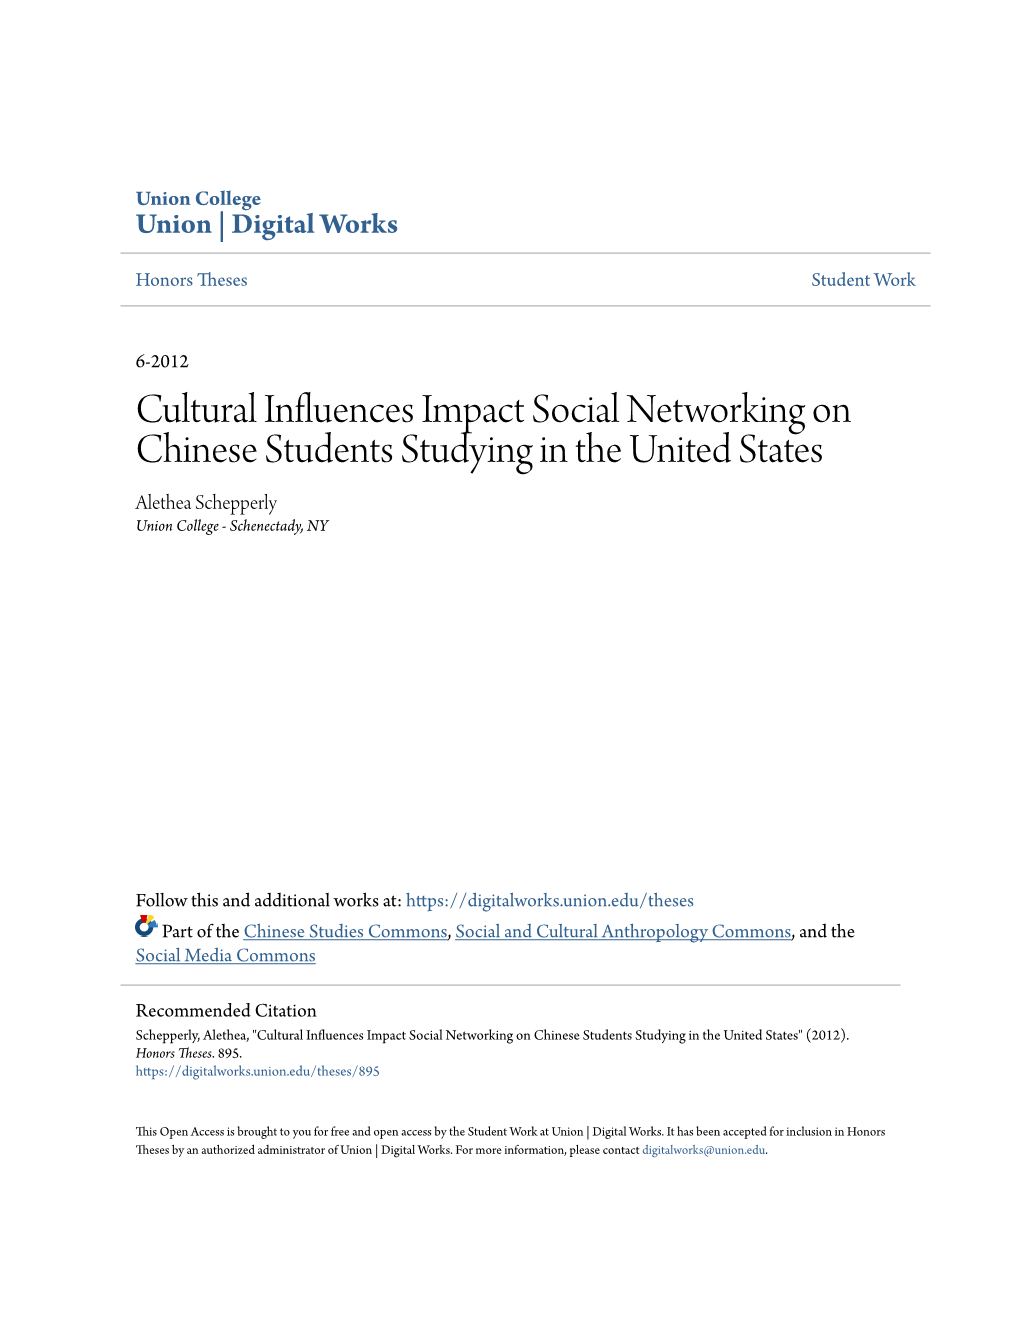 Cultural Influences Impact Social Networking on Chinese Students Studying in the United States Alethea Schepperly Union College - Schenectady, NY